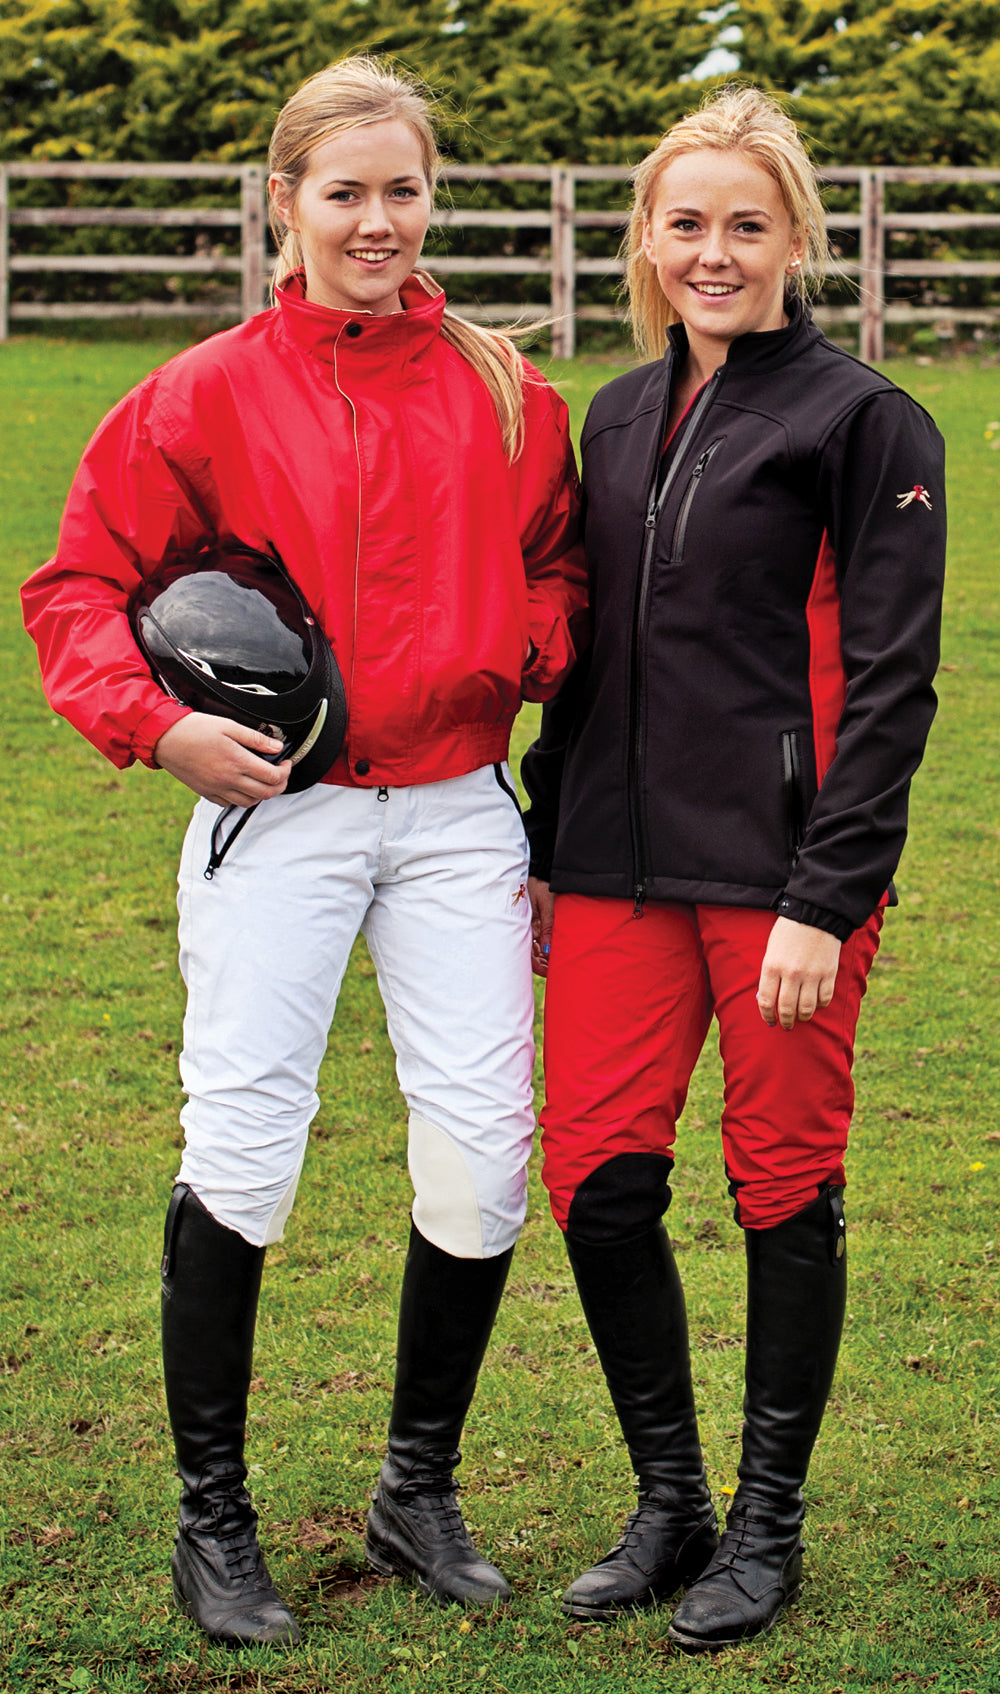 Paul Carberry PC Racewear Blog - Tattersalls Horse Riding Trial 2015 win for Jodie O'Keefe